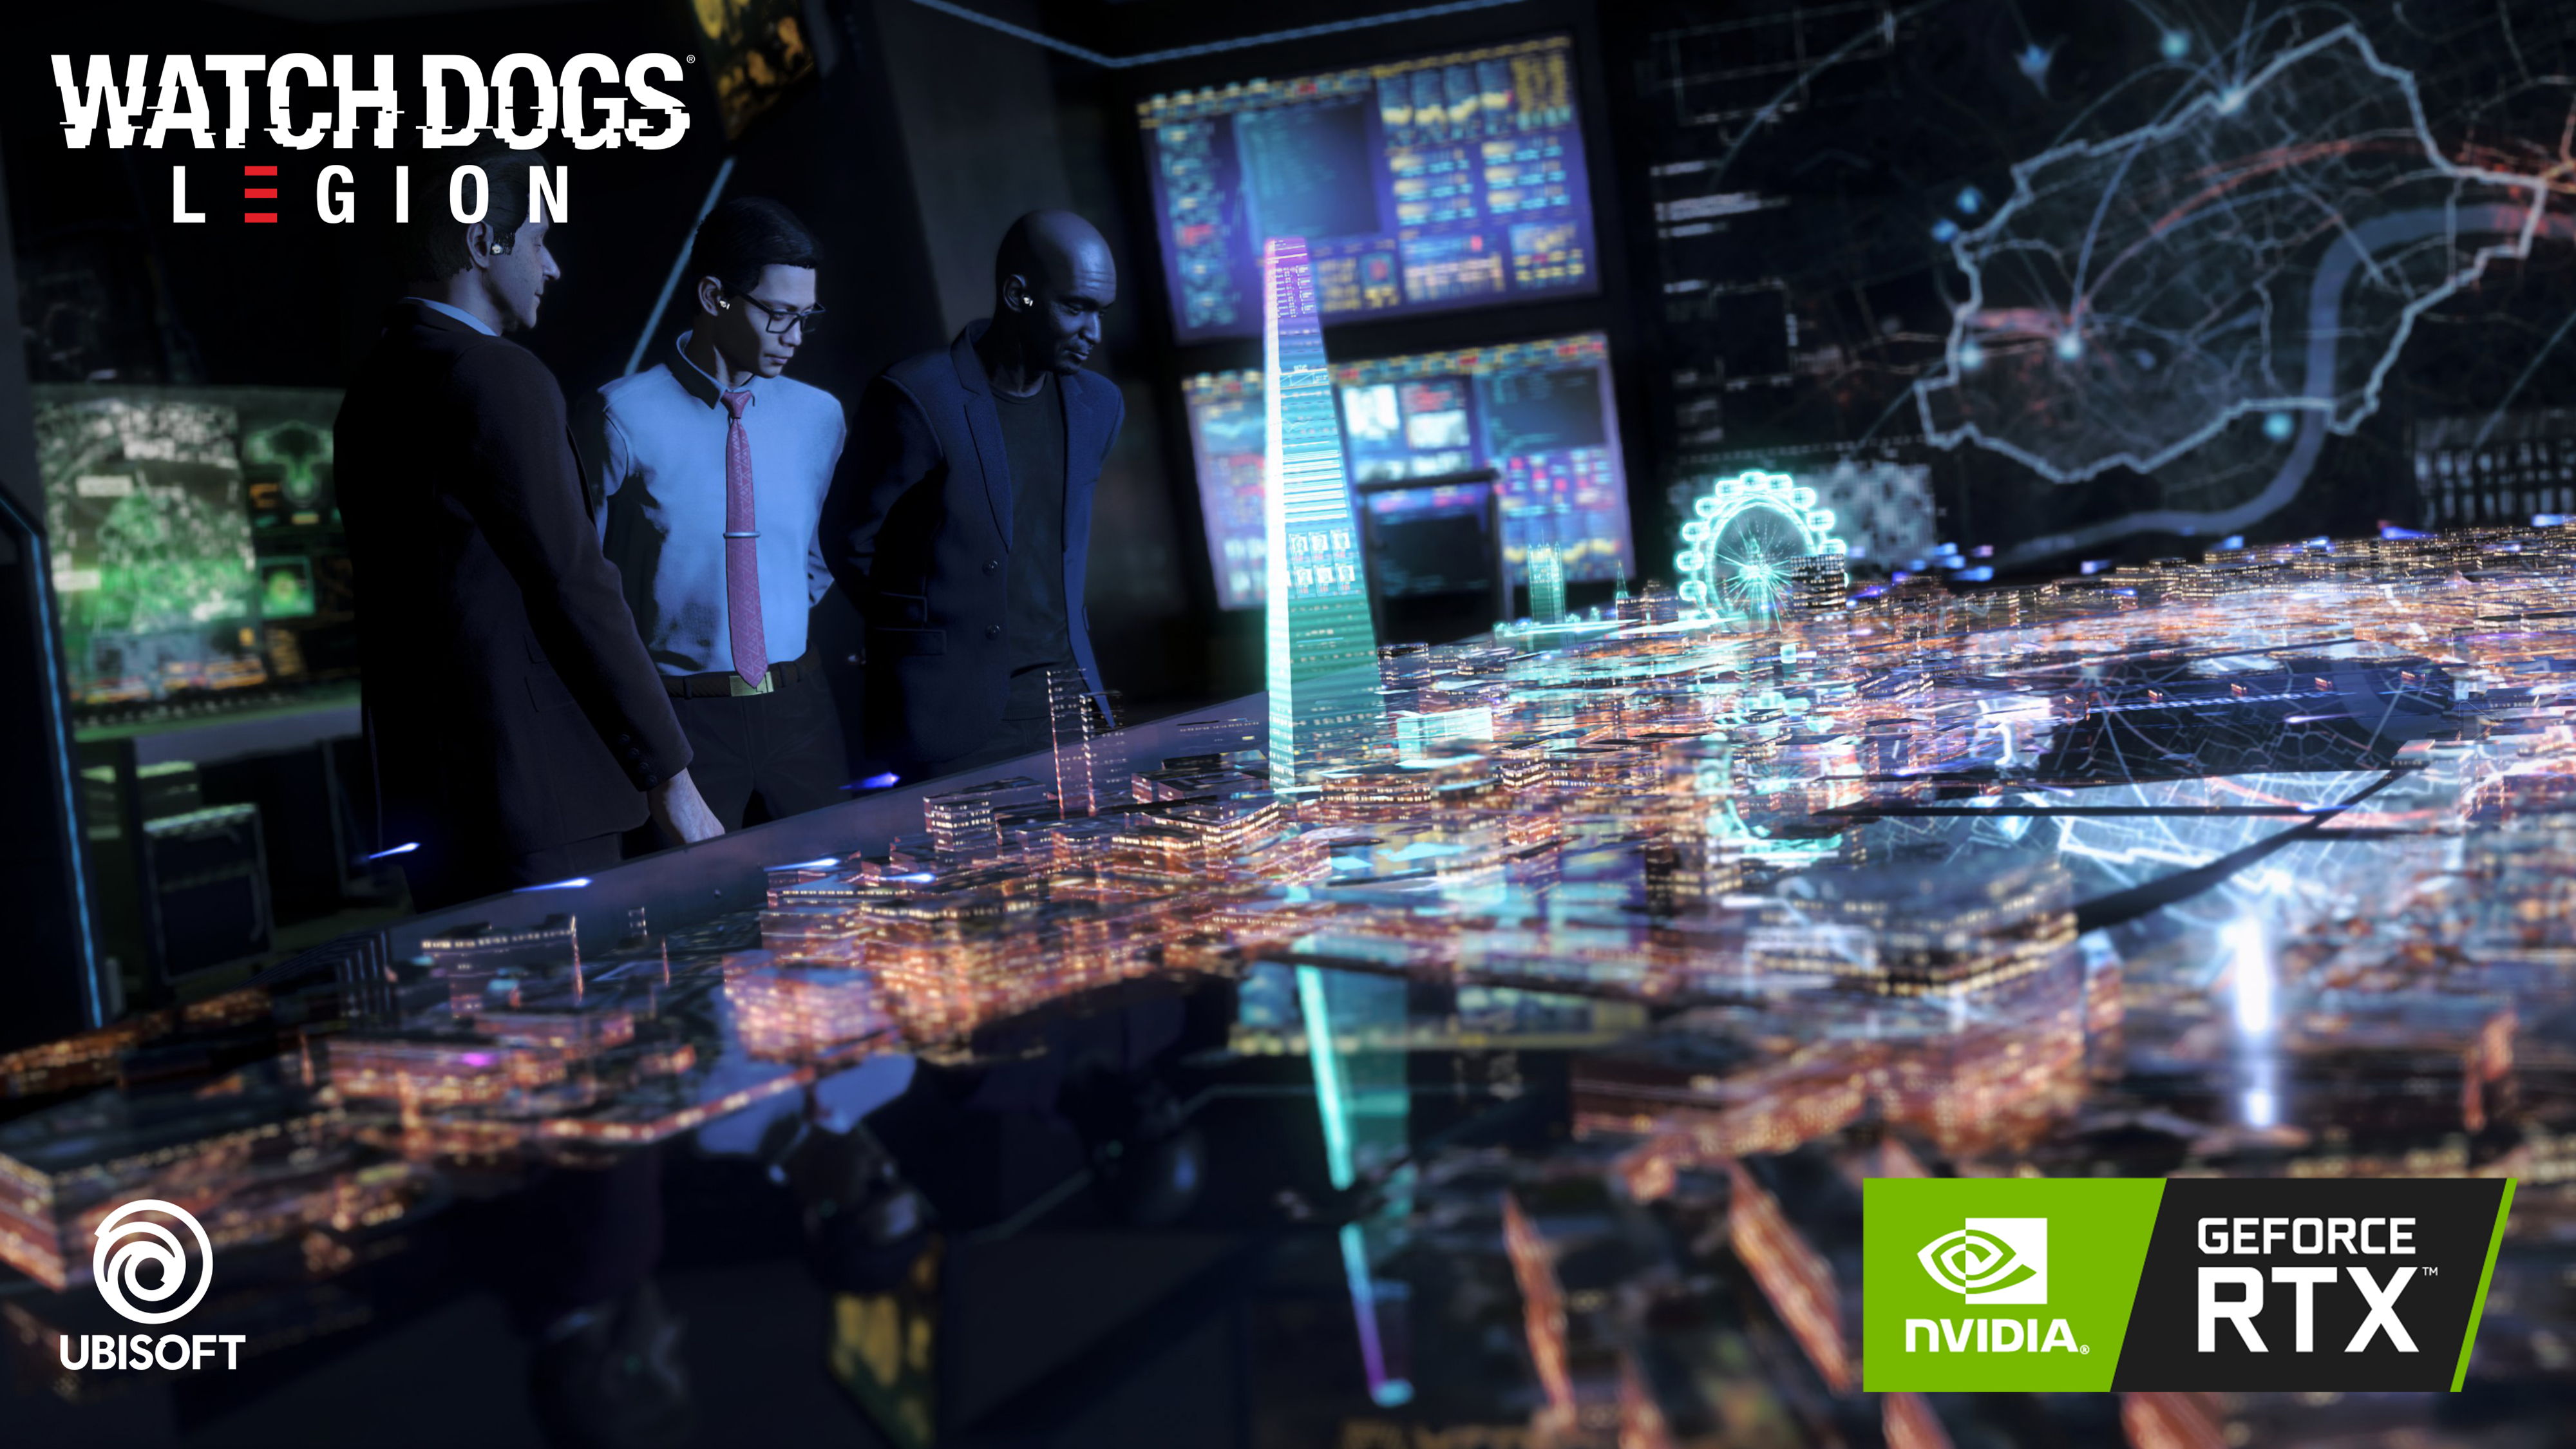 Image from Watch Dogs Legion video game